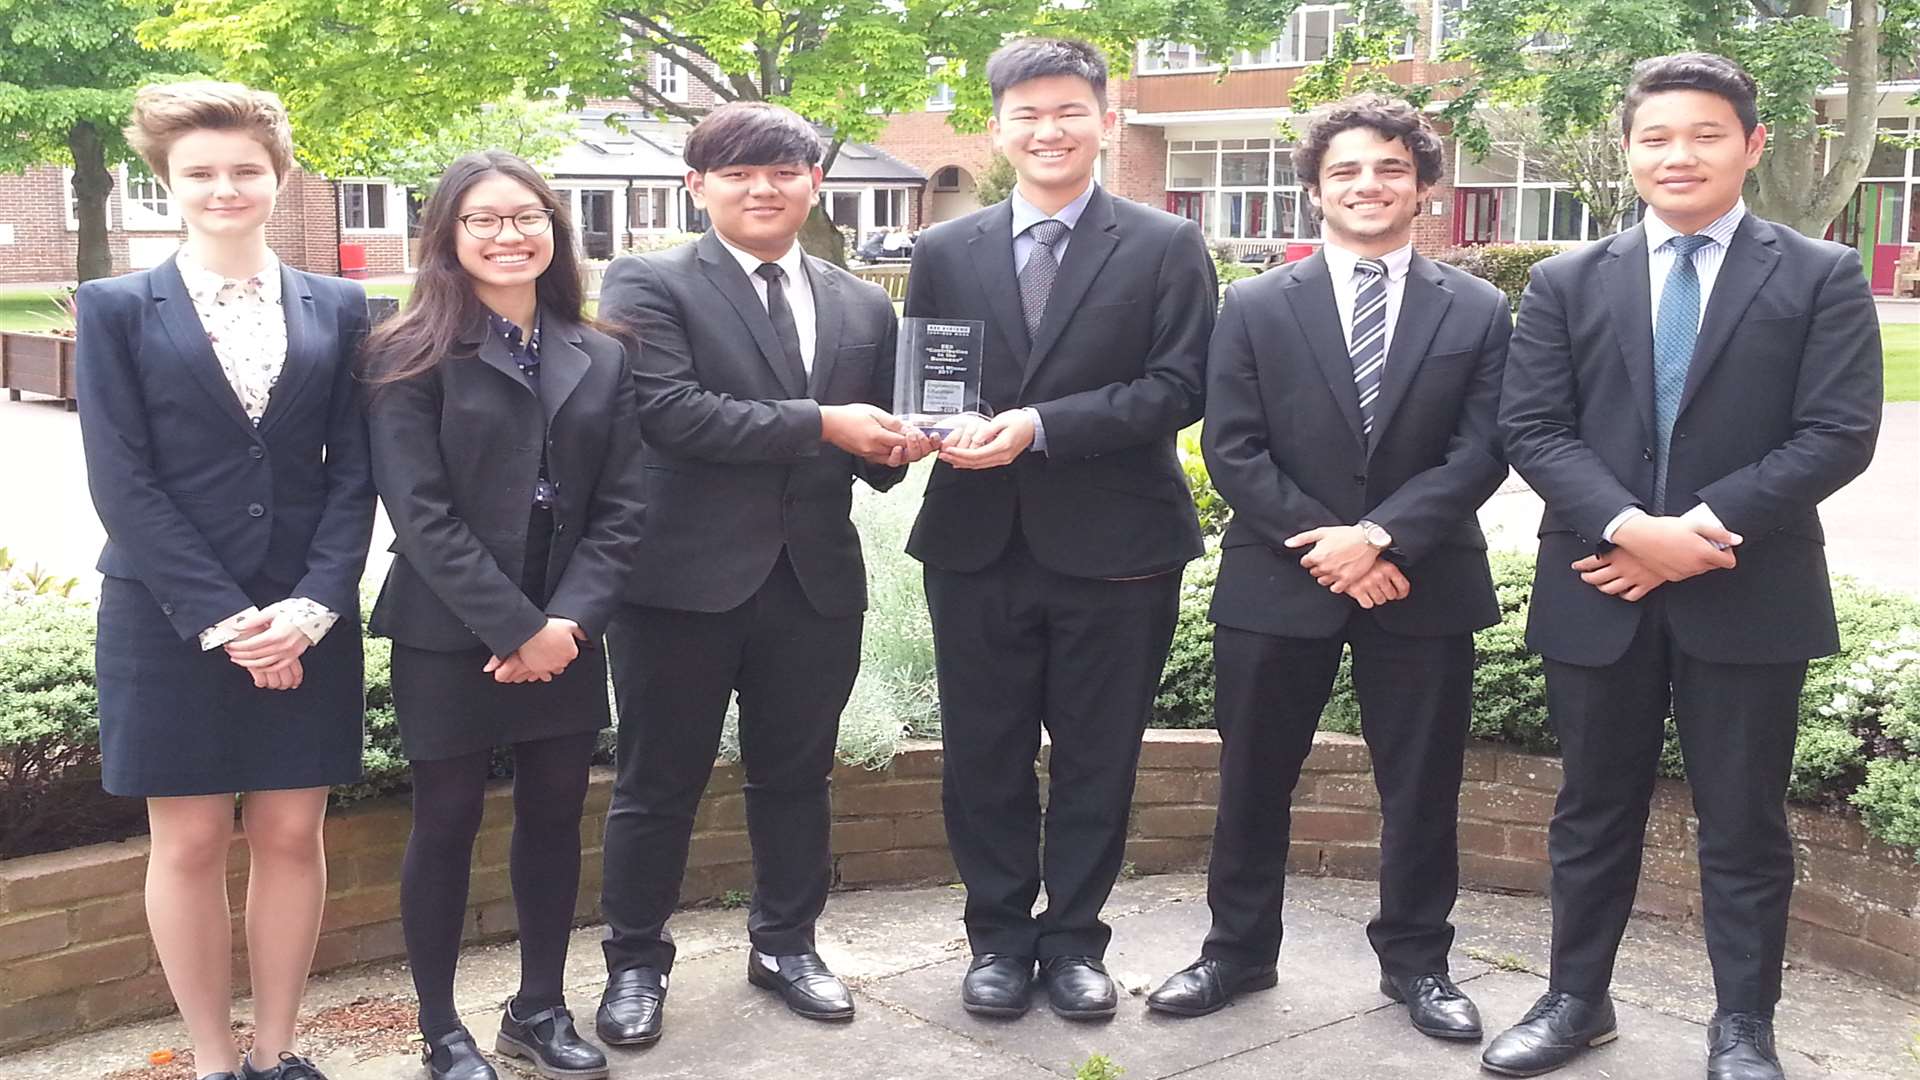 The college's engineering team won South East Young Engineers of the Year and will be attending the national final of the competition this month.